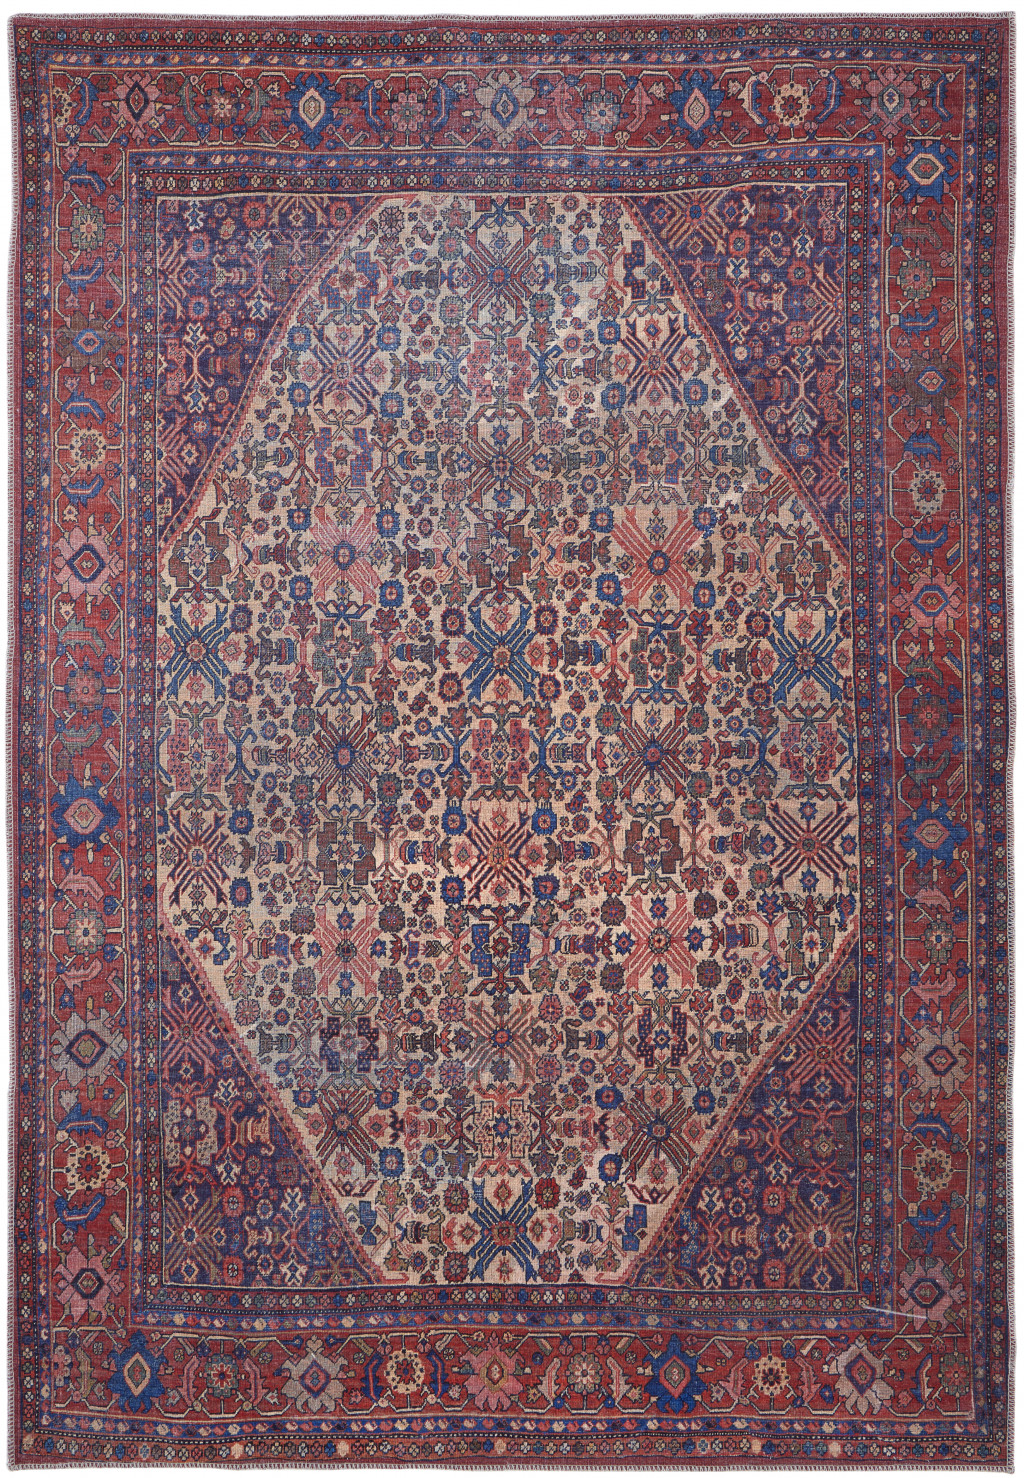 8' X 10' Red Tan And Blue Floral Power Loom Area Rug-515128-1